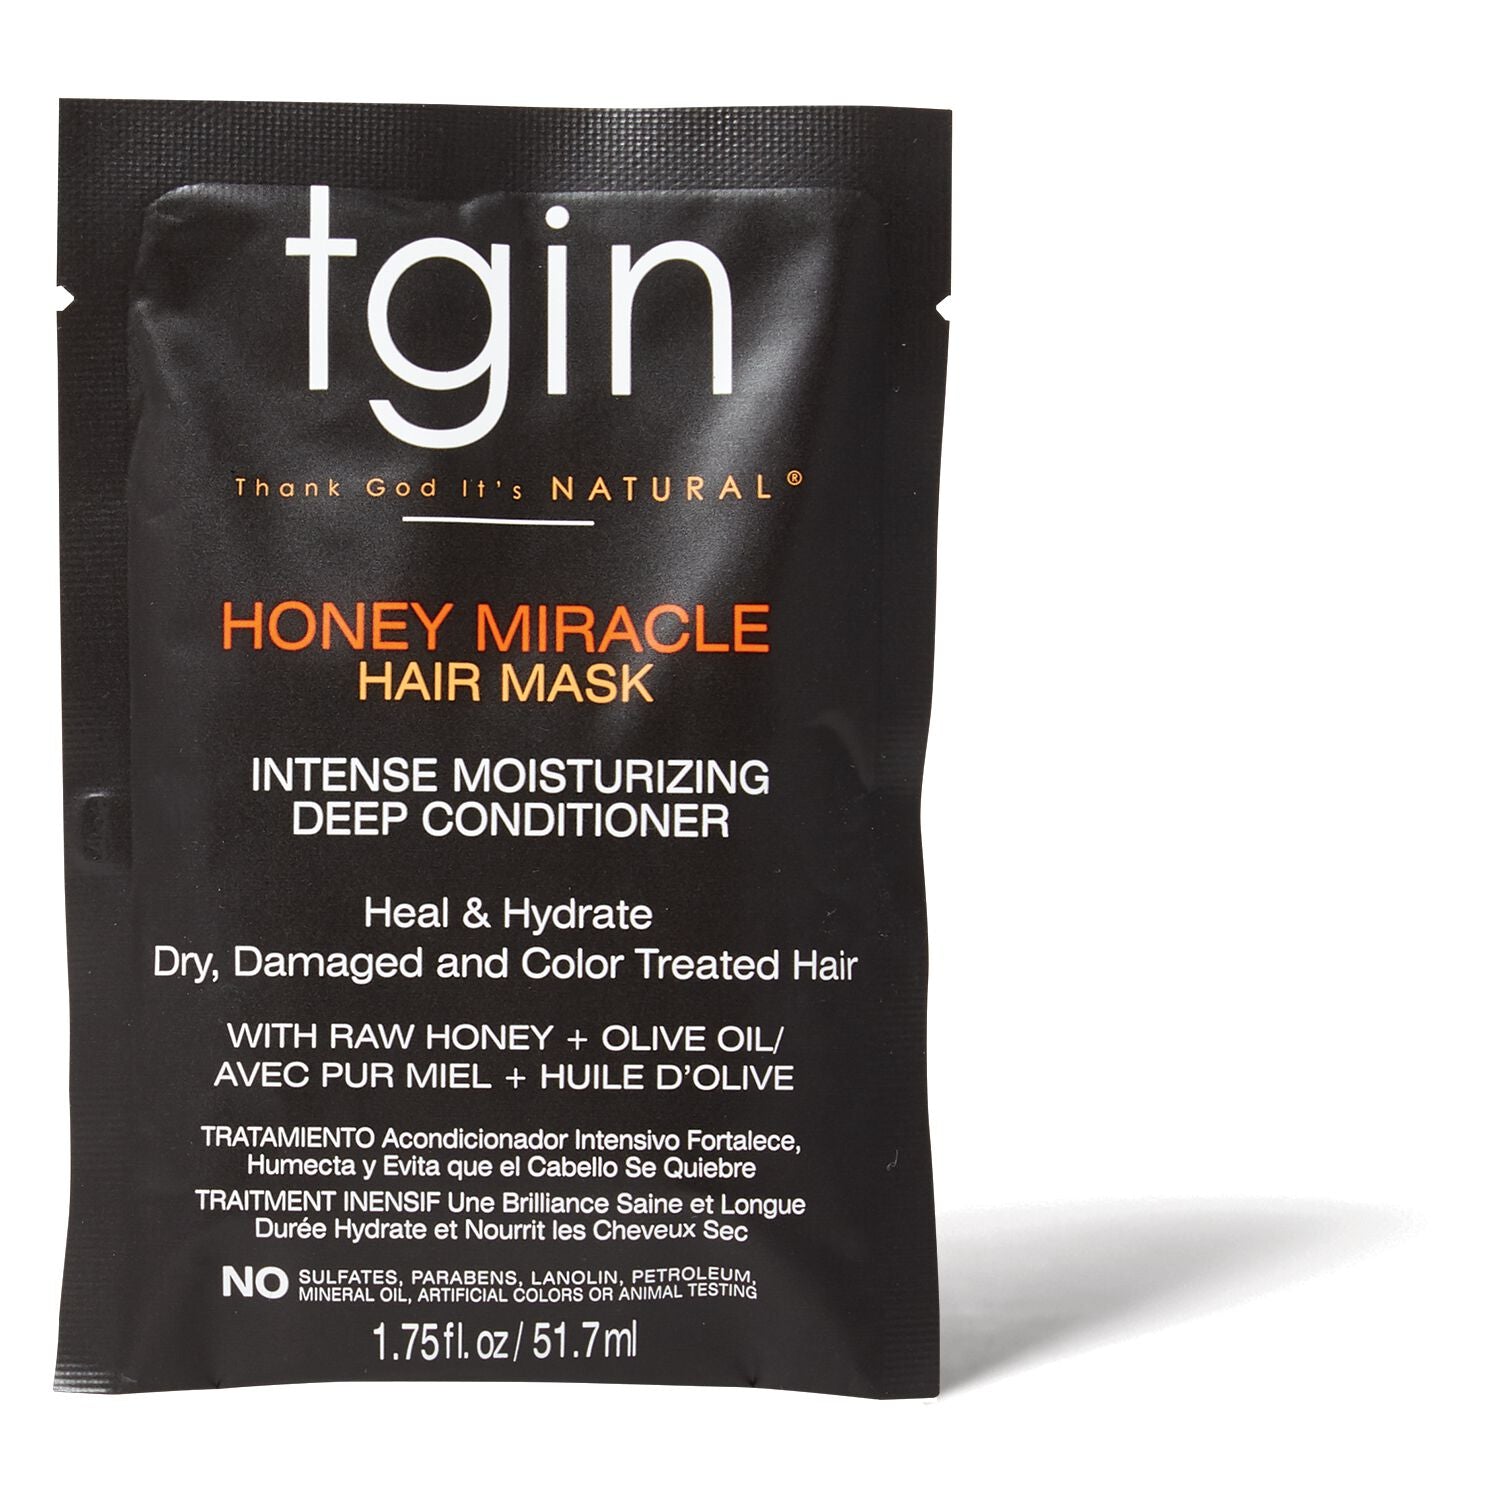 TGIN Honey Miracle Hair Mask Packette